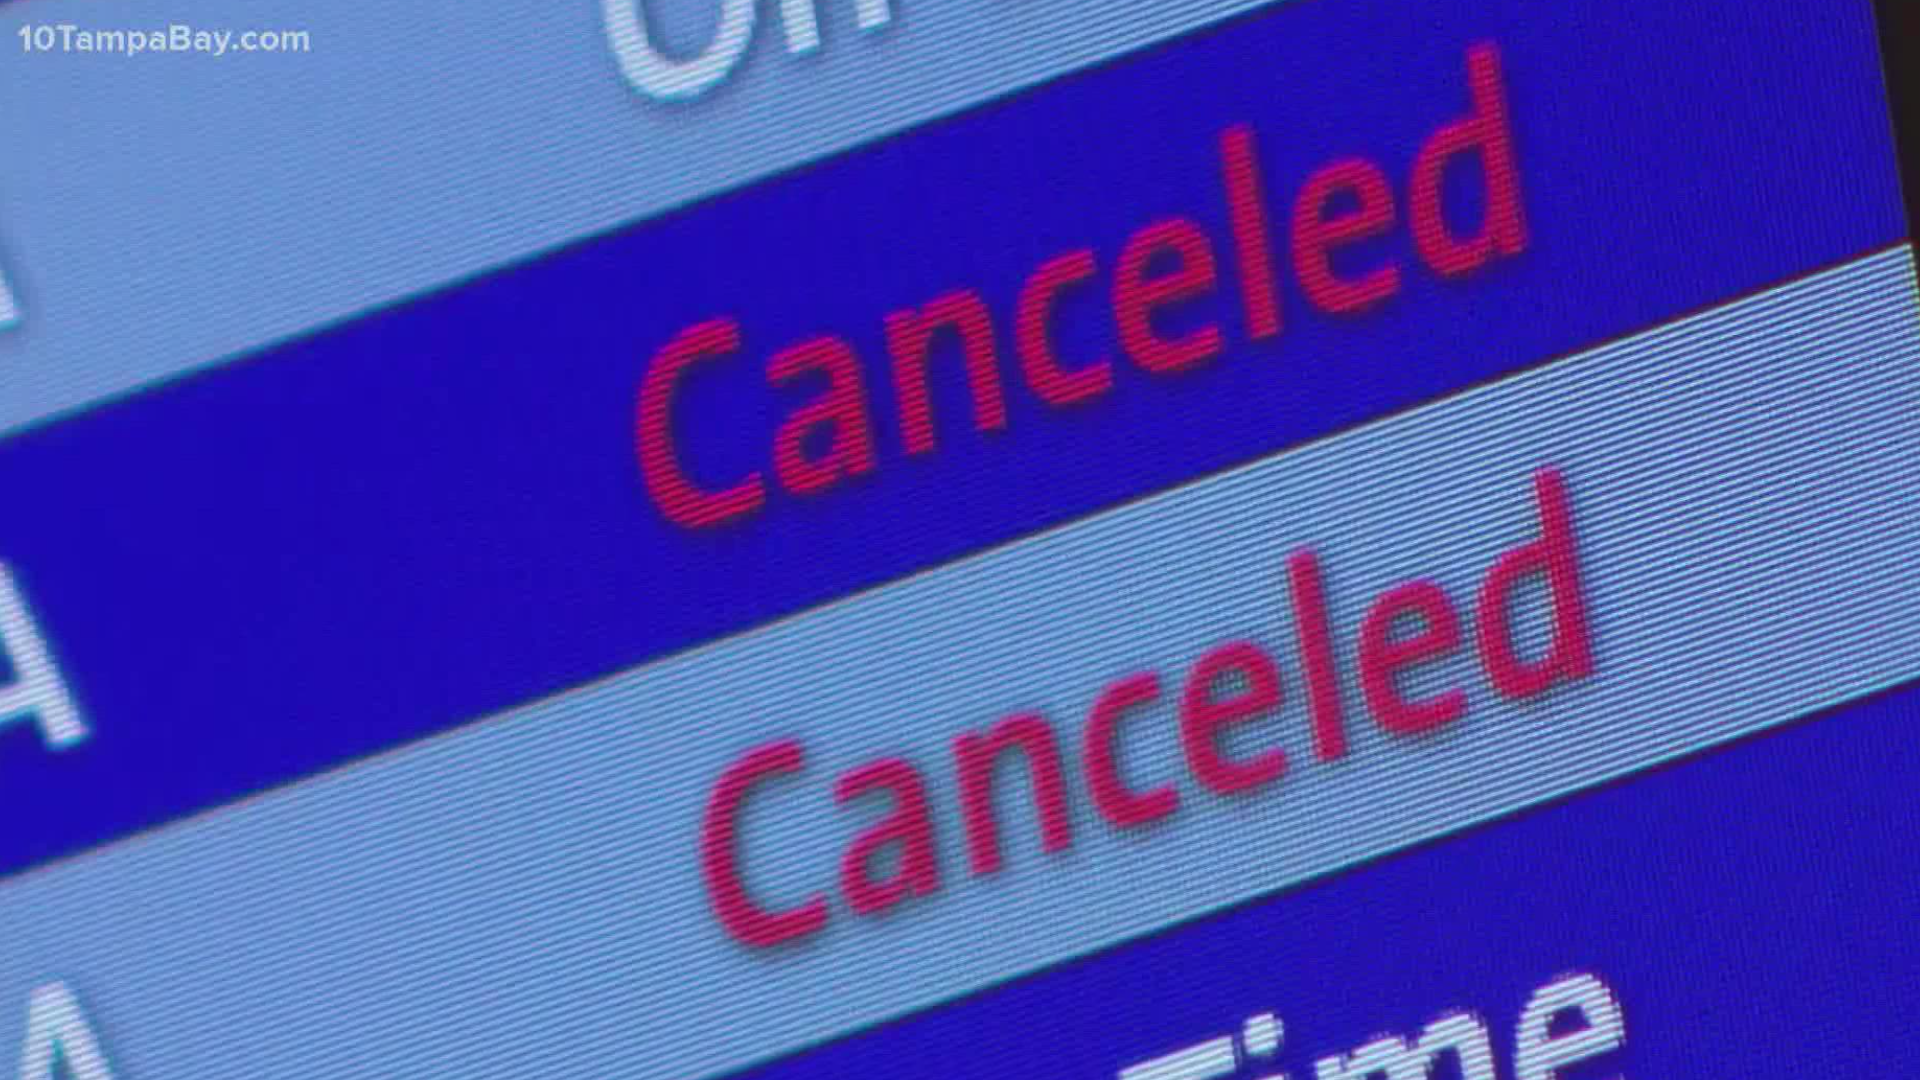 In a statement earlier Monday, Tampa International Airport said it was continuing to see cancellations, though "there has been some improvement."